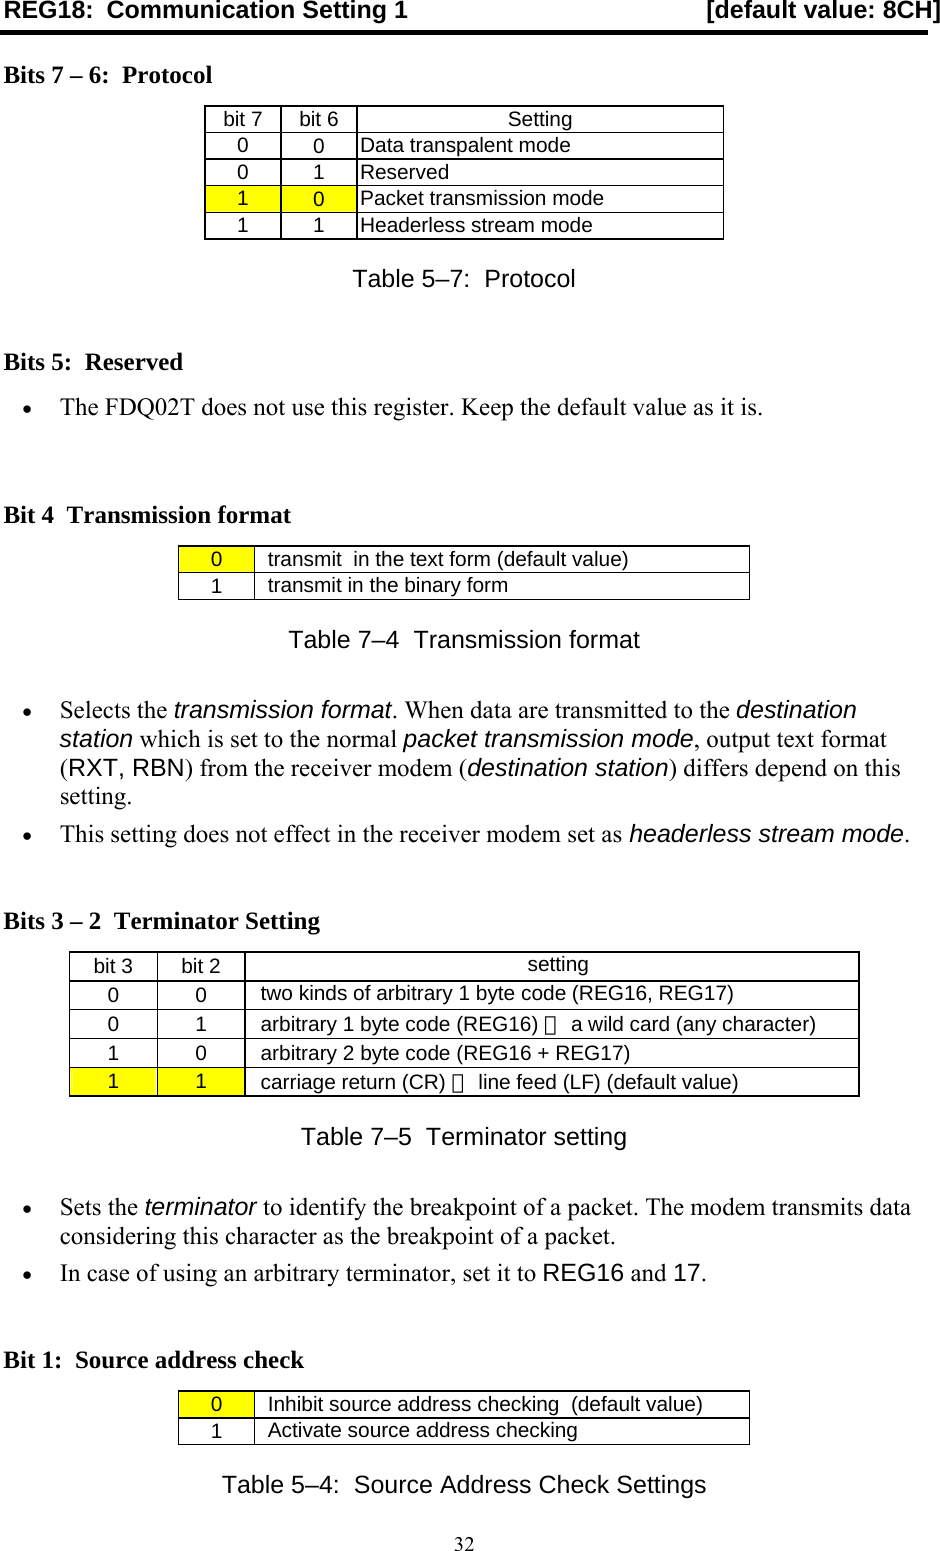  32REG18: Communication Setting 1  [default value: 8CH] Bits 7 – 6:  Protocol bit 7  bit 6  Setting 0  0  Data transpalent mode 0  1  Reserved 1  0  Packet transmission mode 1  1  Headerless stream mode Table 5–7:  Protocol Bits 5:  Reserved •  The FDQ02T does not use this register. Keep the default value as it is.   Bit 4  Transmission format 0   transmit  in the text form (default value) 1   transmit in the binary form Table 7–4  Transmission format •  Selects the transmission format. When data are transmitted to the destination station which is set to the normal packet transmission mode, output text format (RXT, RBN) from the receiver modem (destination station) differs depend on this setting. •  This setting does not effect in the receiver modem set as headerless stream mode.  Bits 3 – 2  Terminator Setting bit 3  bit 2   setting 0  0   two kinds of arbitrary 1 byte code (REG16, REG17) 0  1   arbitrary 1 byte code (REG16) ＋ a wild card (any character) 1  0   arbitrary 2 byte code (REG16 + REG17) 1  1   carriage return (CR) ＋ line feed (LF) (default value) Table 7–5  Terminator setting •  Sets the terminator to identify the breakpoint of a packet. The modem transmits data considering this character as the breakpoint of a packet. •  In case of using an arbitrary terminator, set it to REG16 and 17.   Bit 1:  Source address check 0   Inhibit source address checking  (default value) 1   Activate source address checking Table 5–4:  Source Address Check Settings 